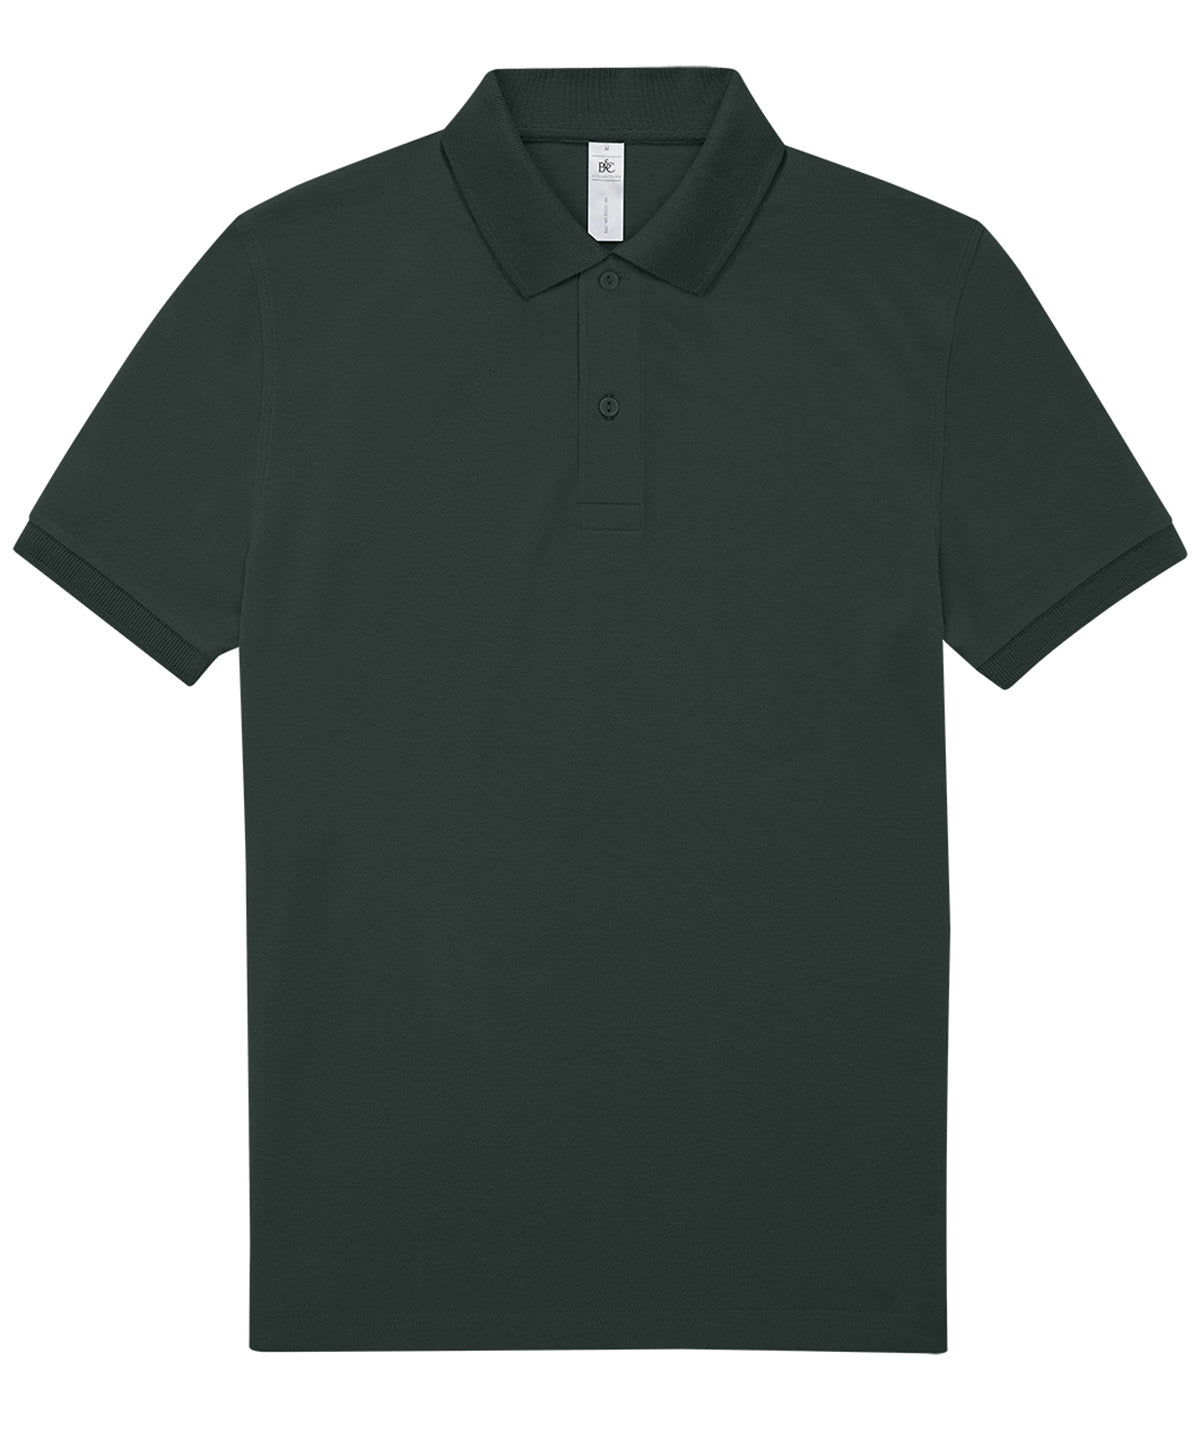 Personalised Polo Shirts - Navy B&C Collection B&C My Polo 180